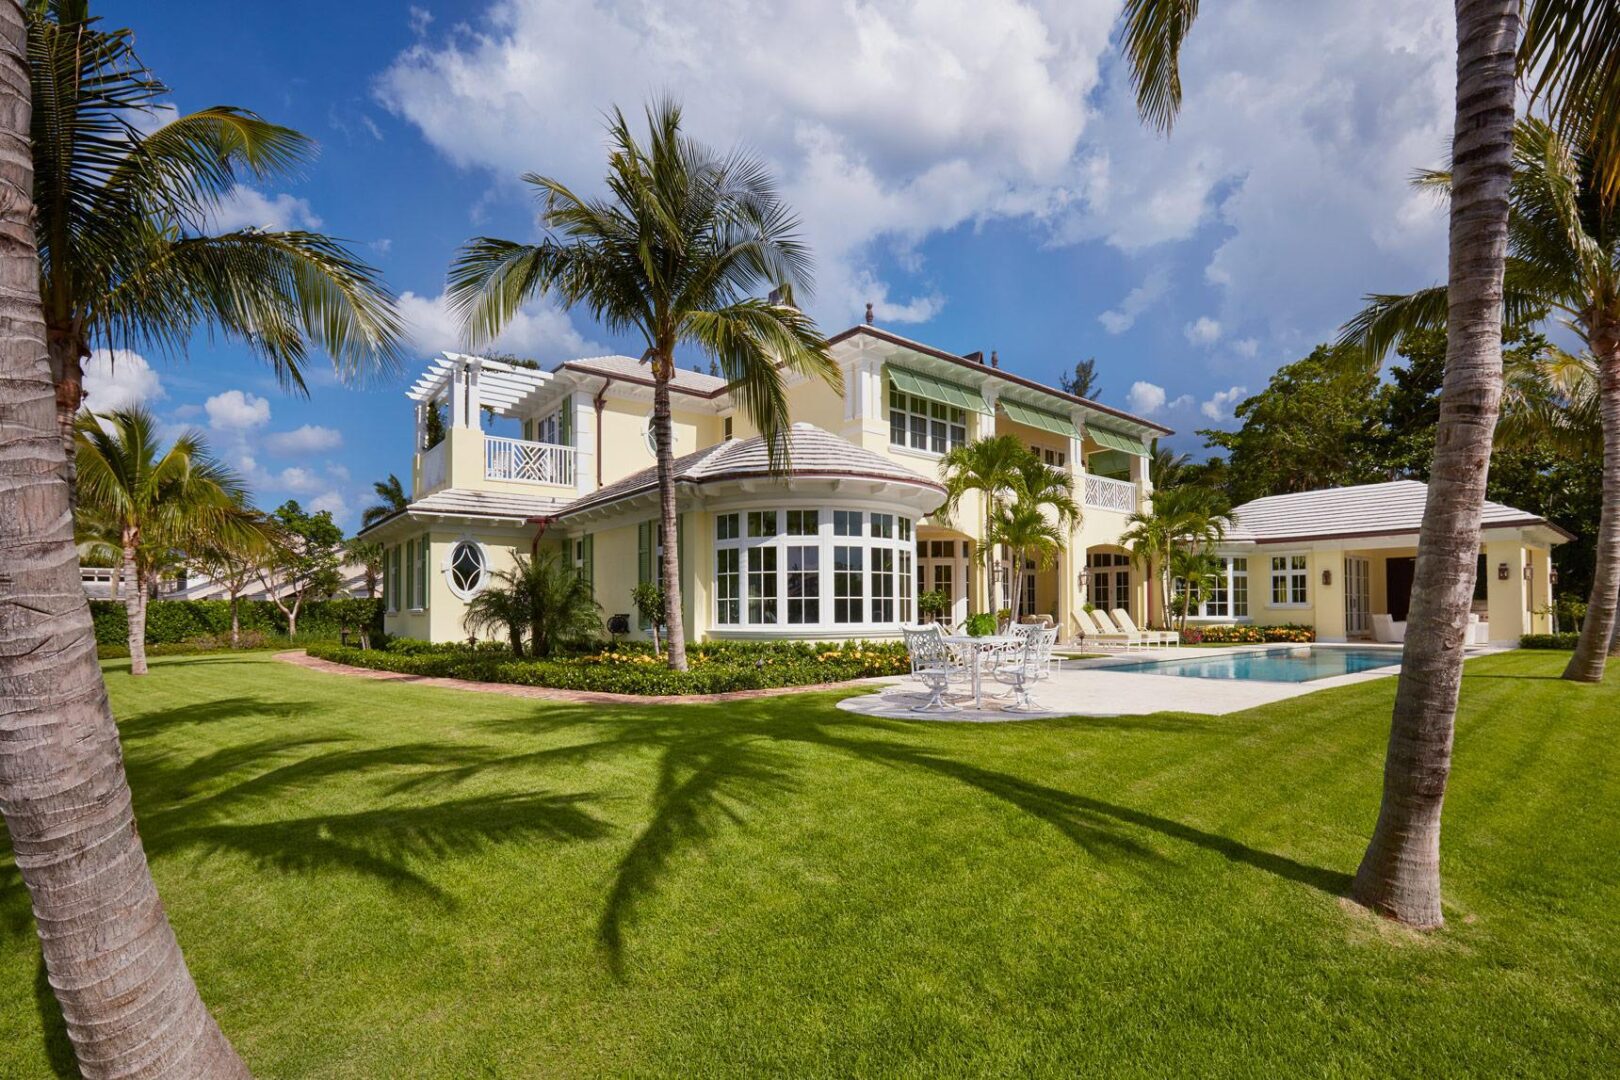 A large white house with palm trees in the background.